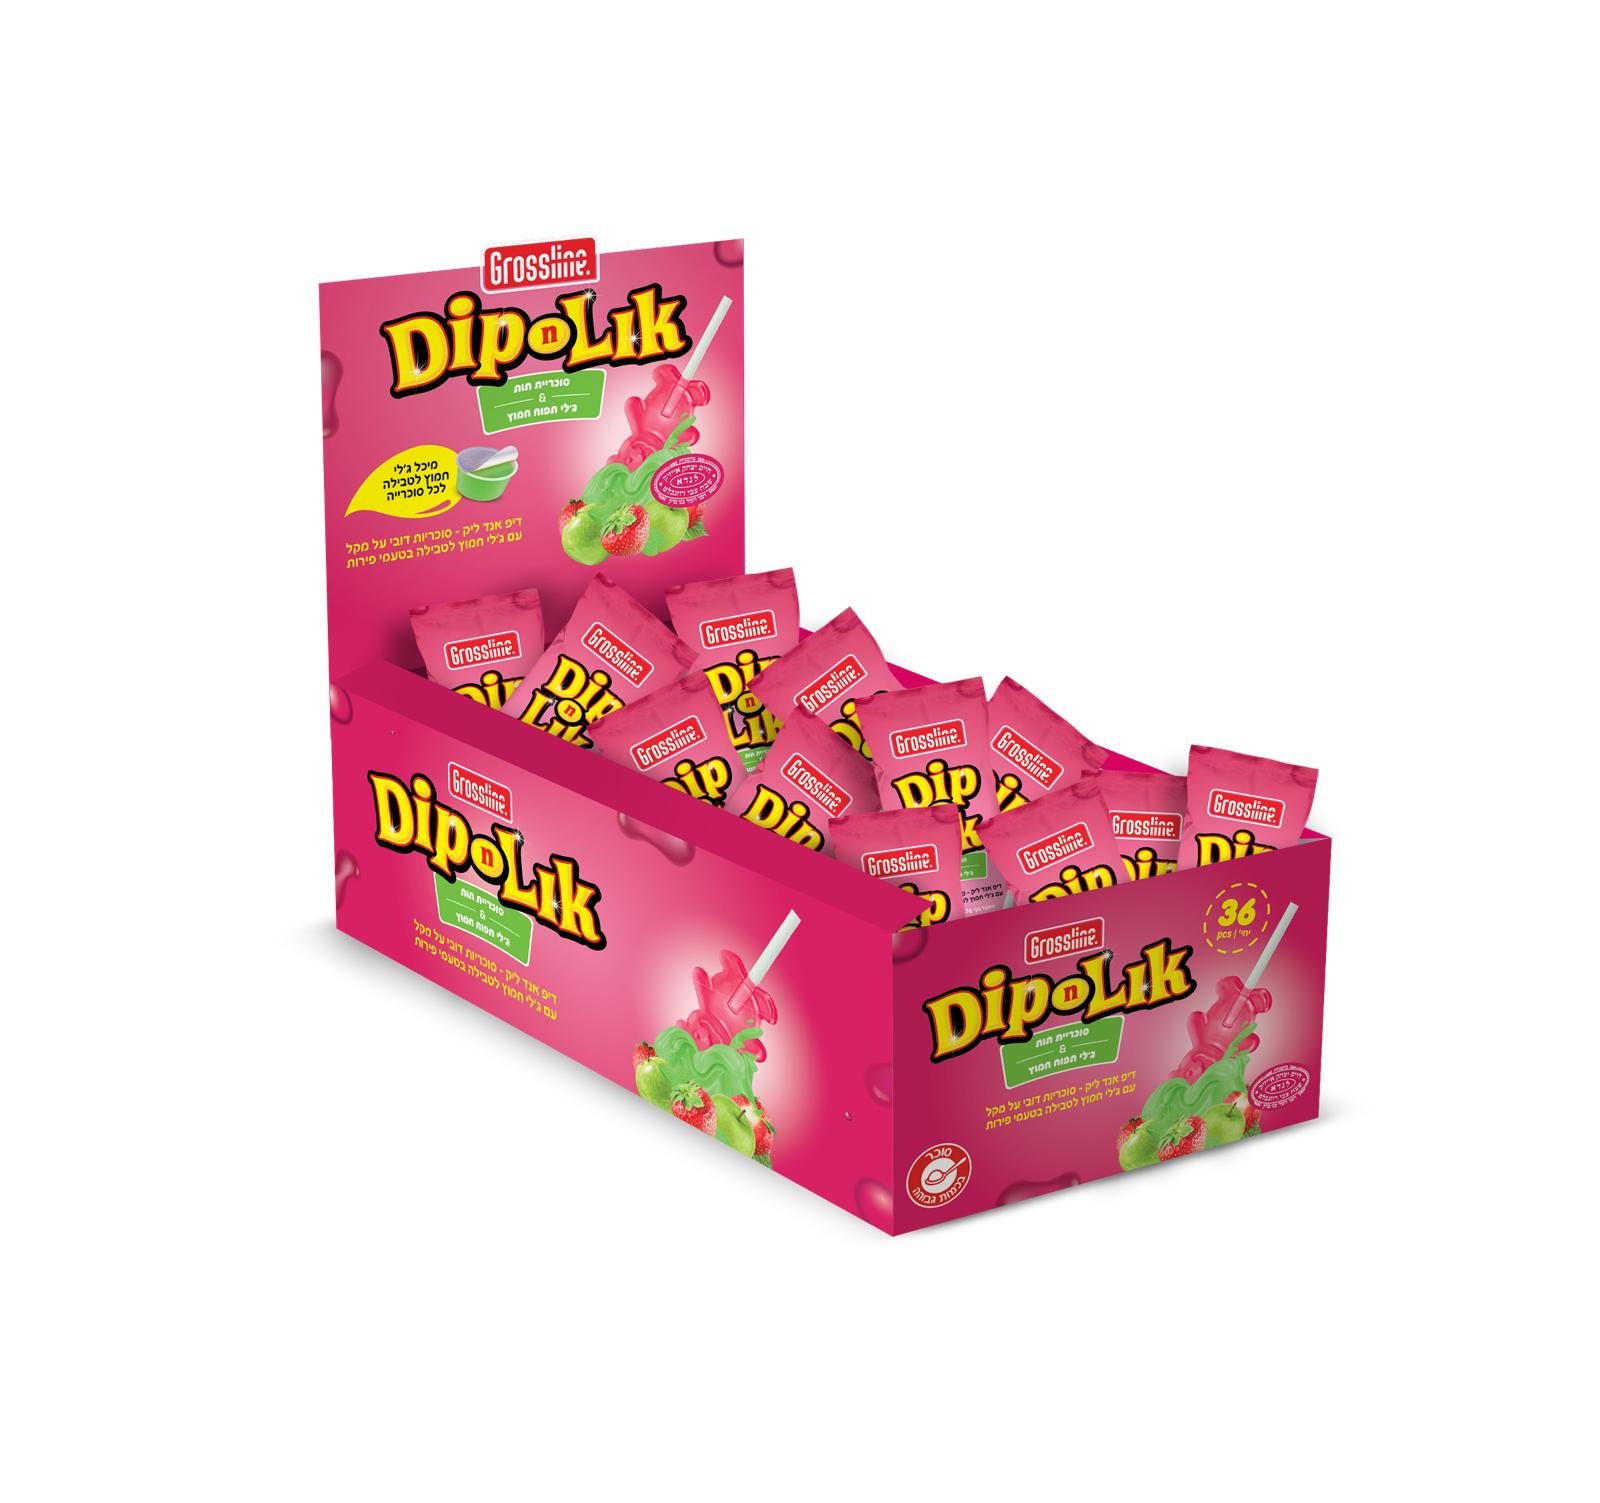 GROSSLINE DIP AND LIK DISPLAY STRAWBERRY AND SOUR APPLE GEL 36 PCS